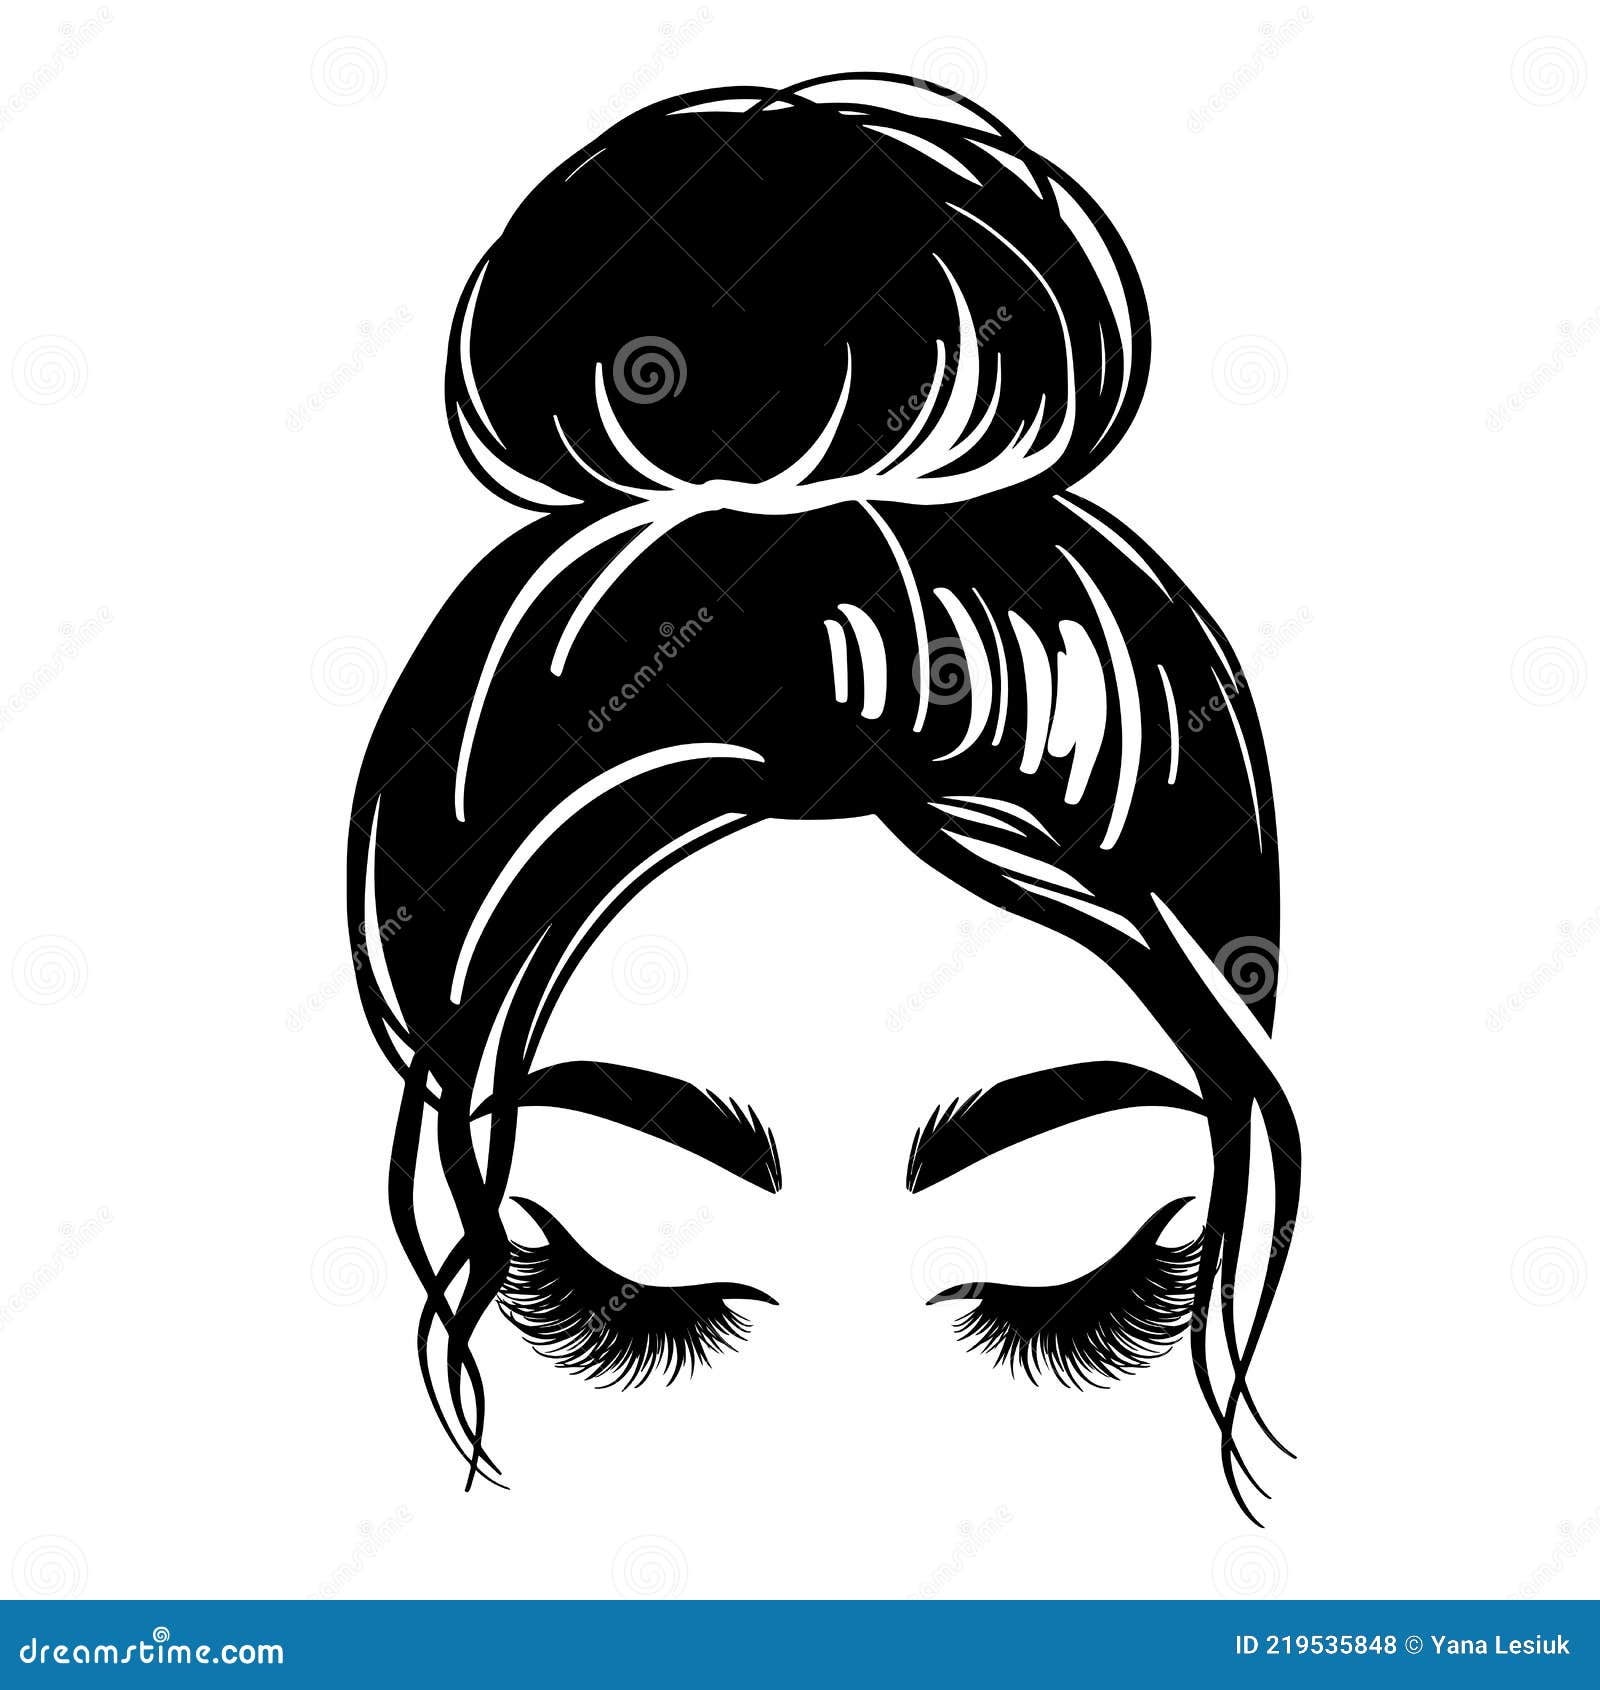 Pin on Hair Styles for Women Sketches of Hairstyles